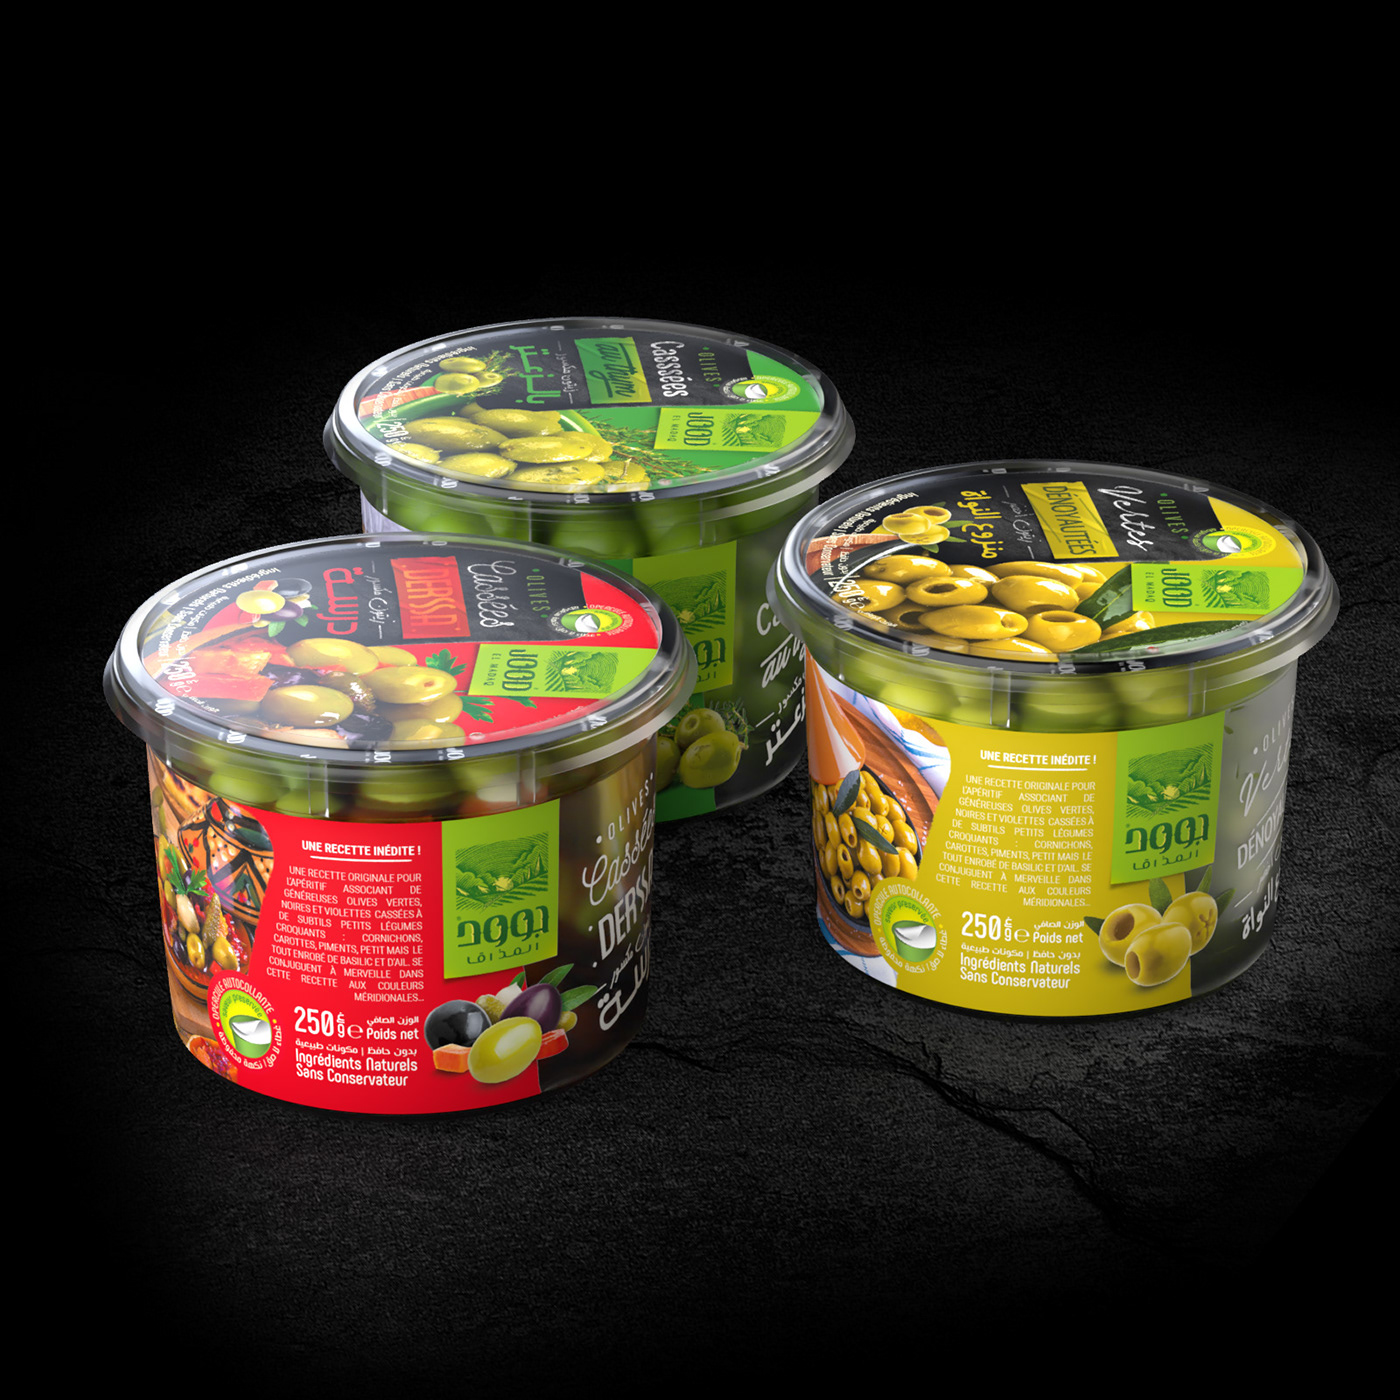 emballage emballagealgerie maquetta olive olives Packaging